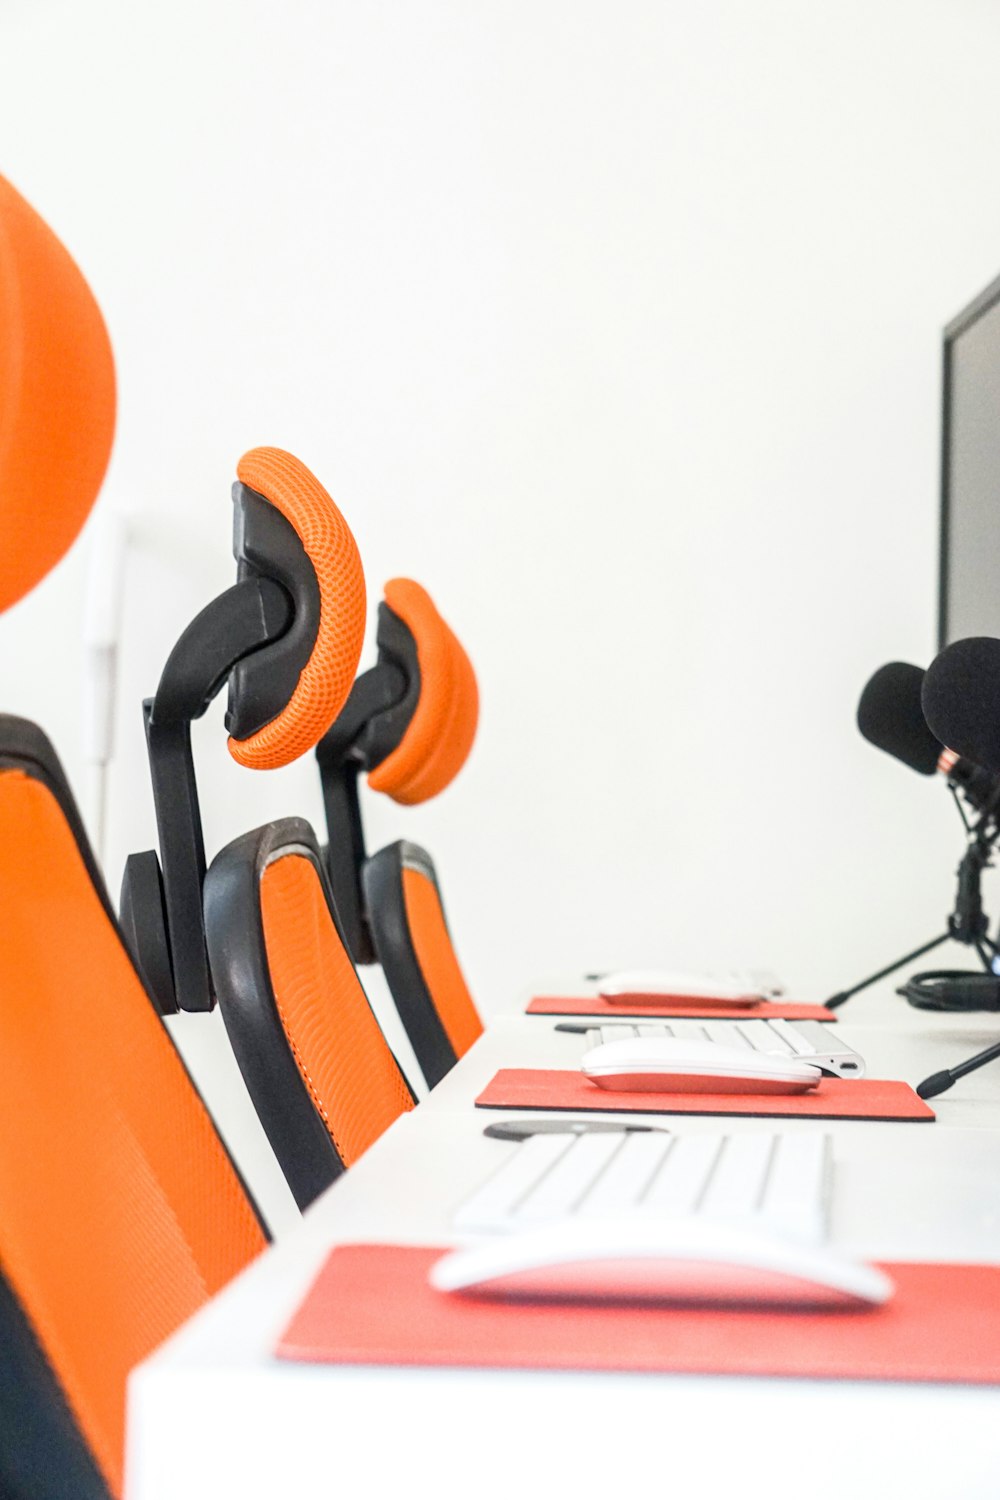 black and orange office rolling chair